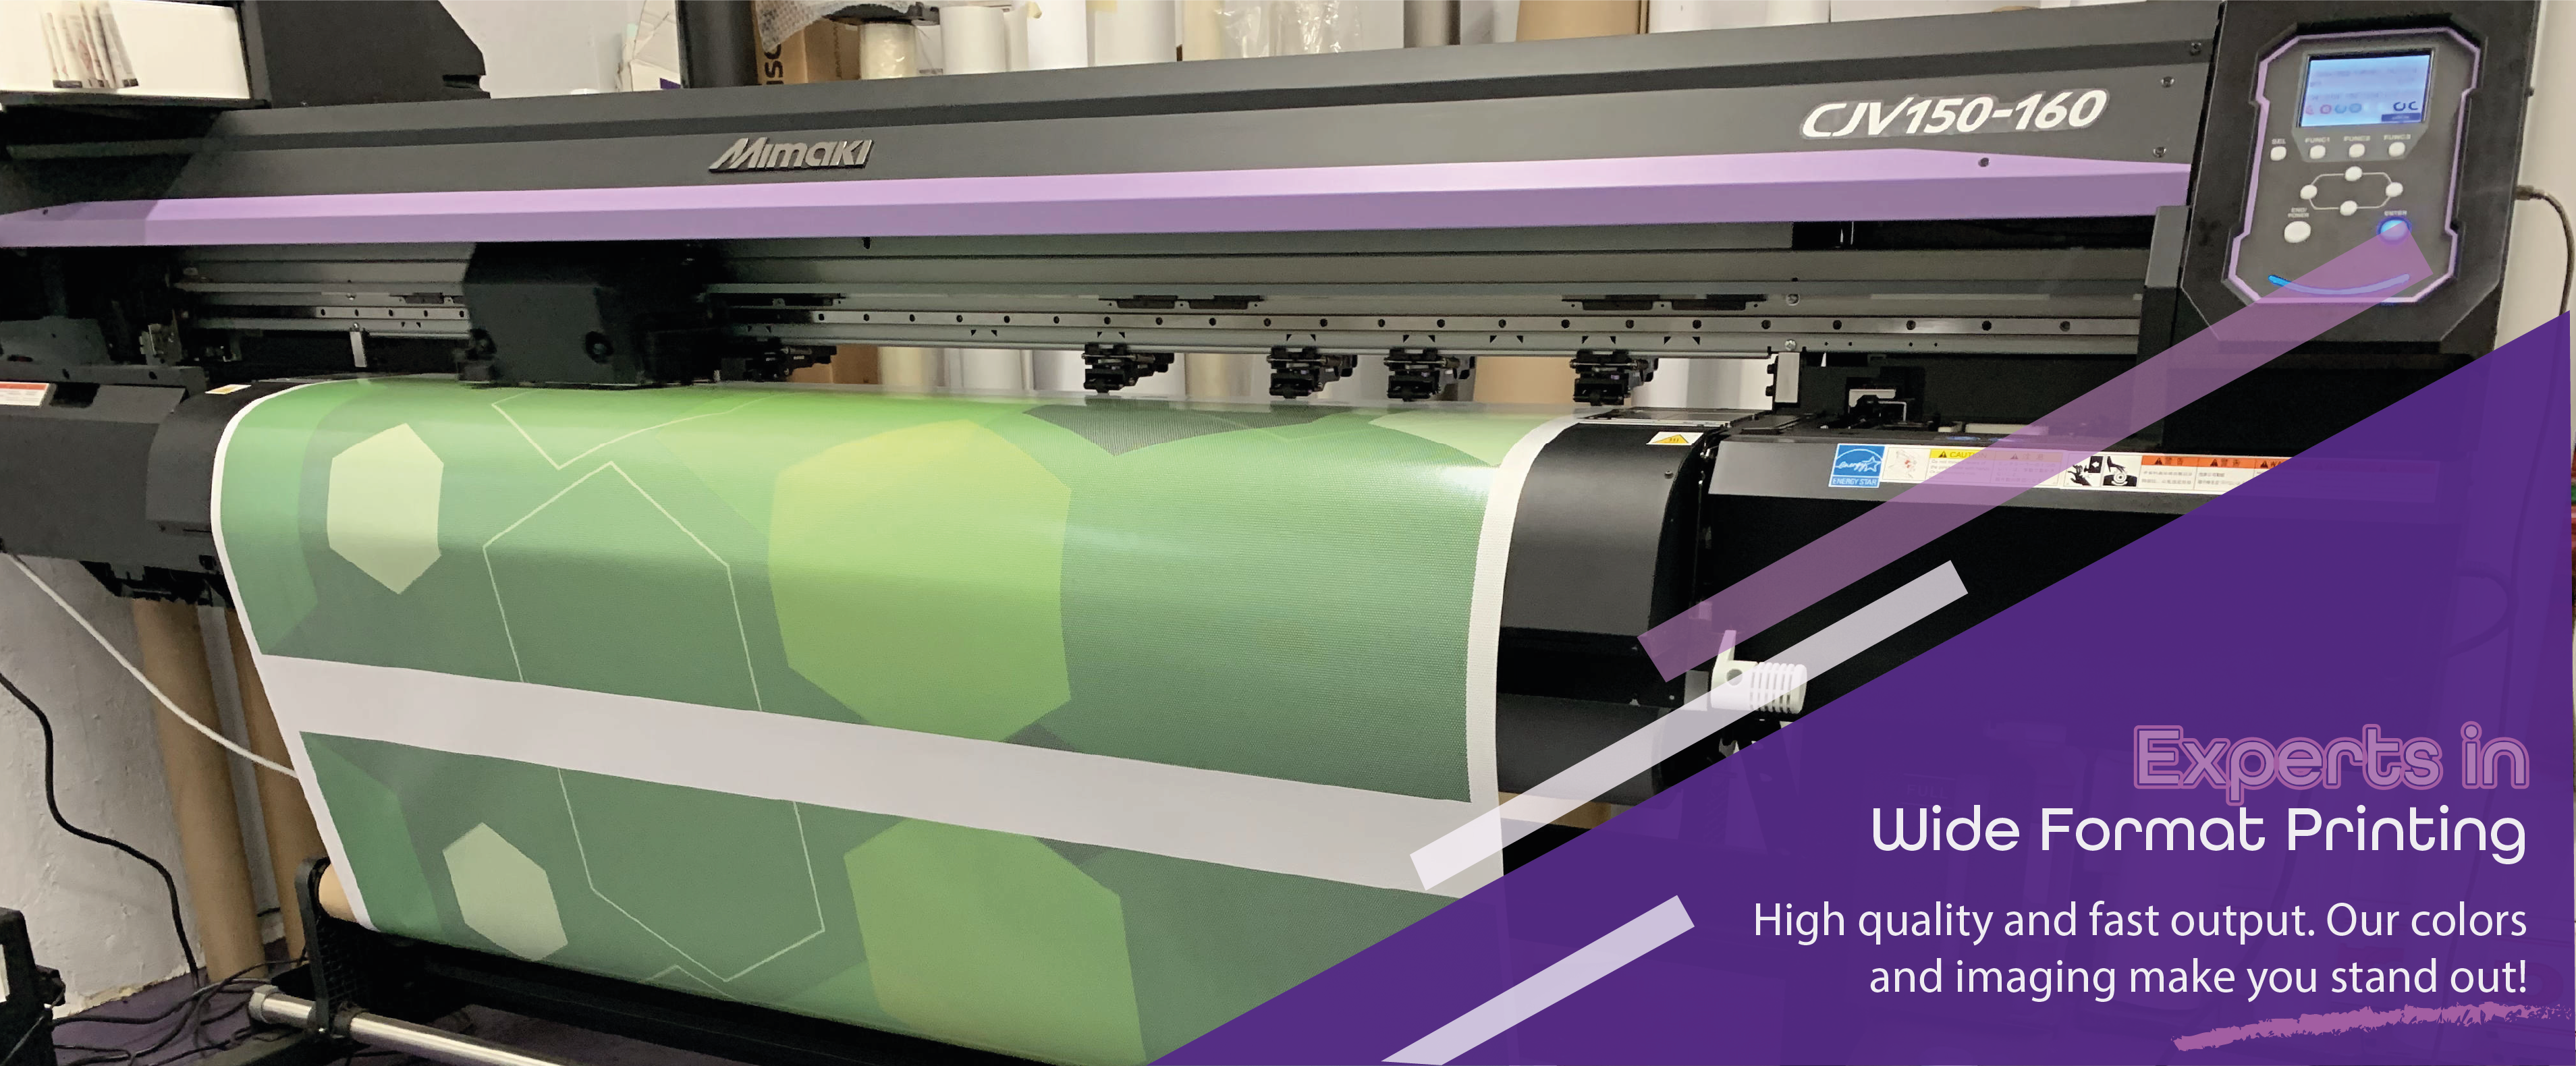 PHOTO OF WIDE FORMAT PRINTING